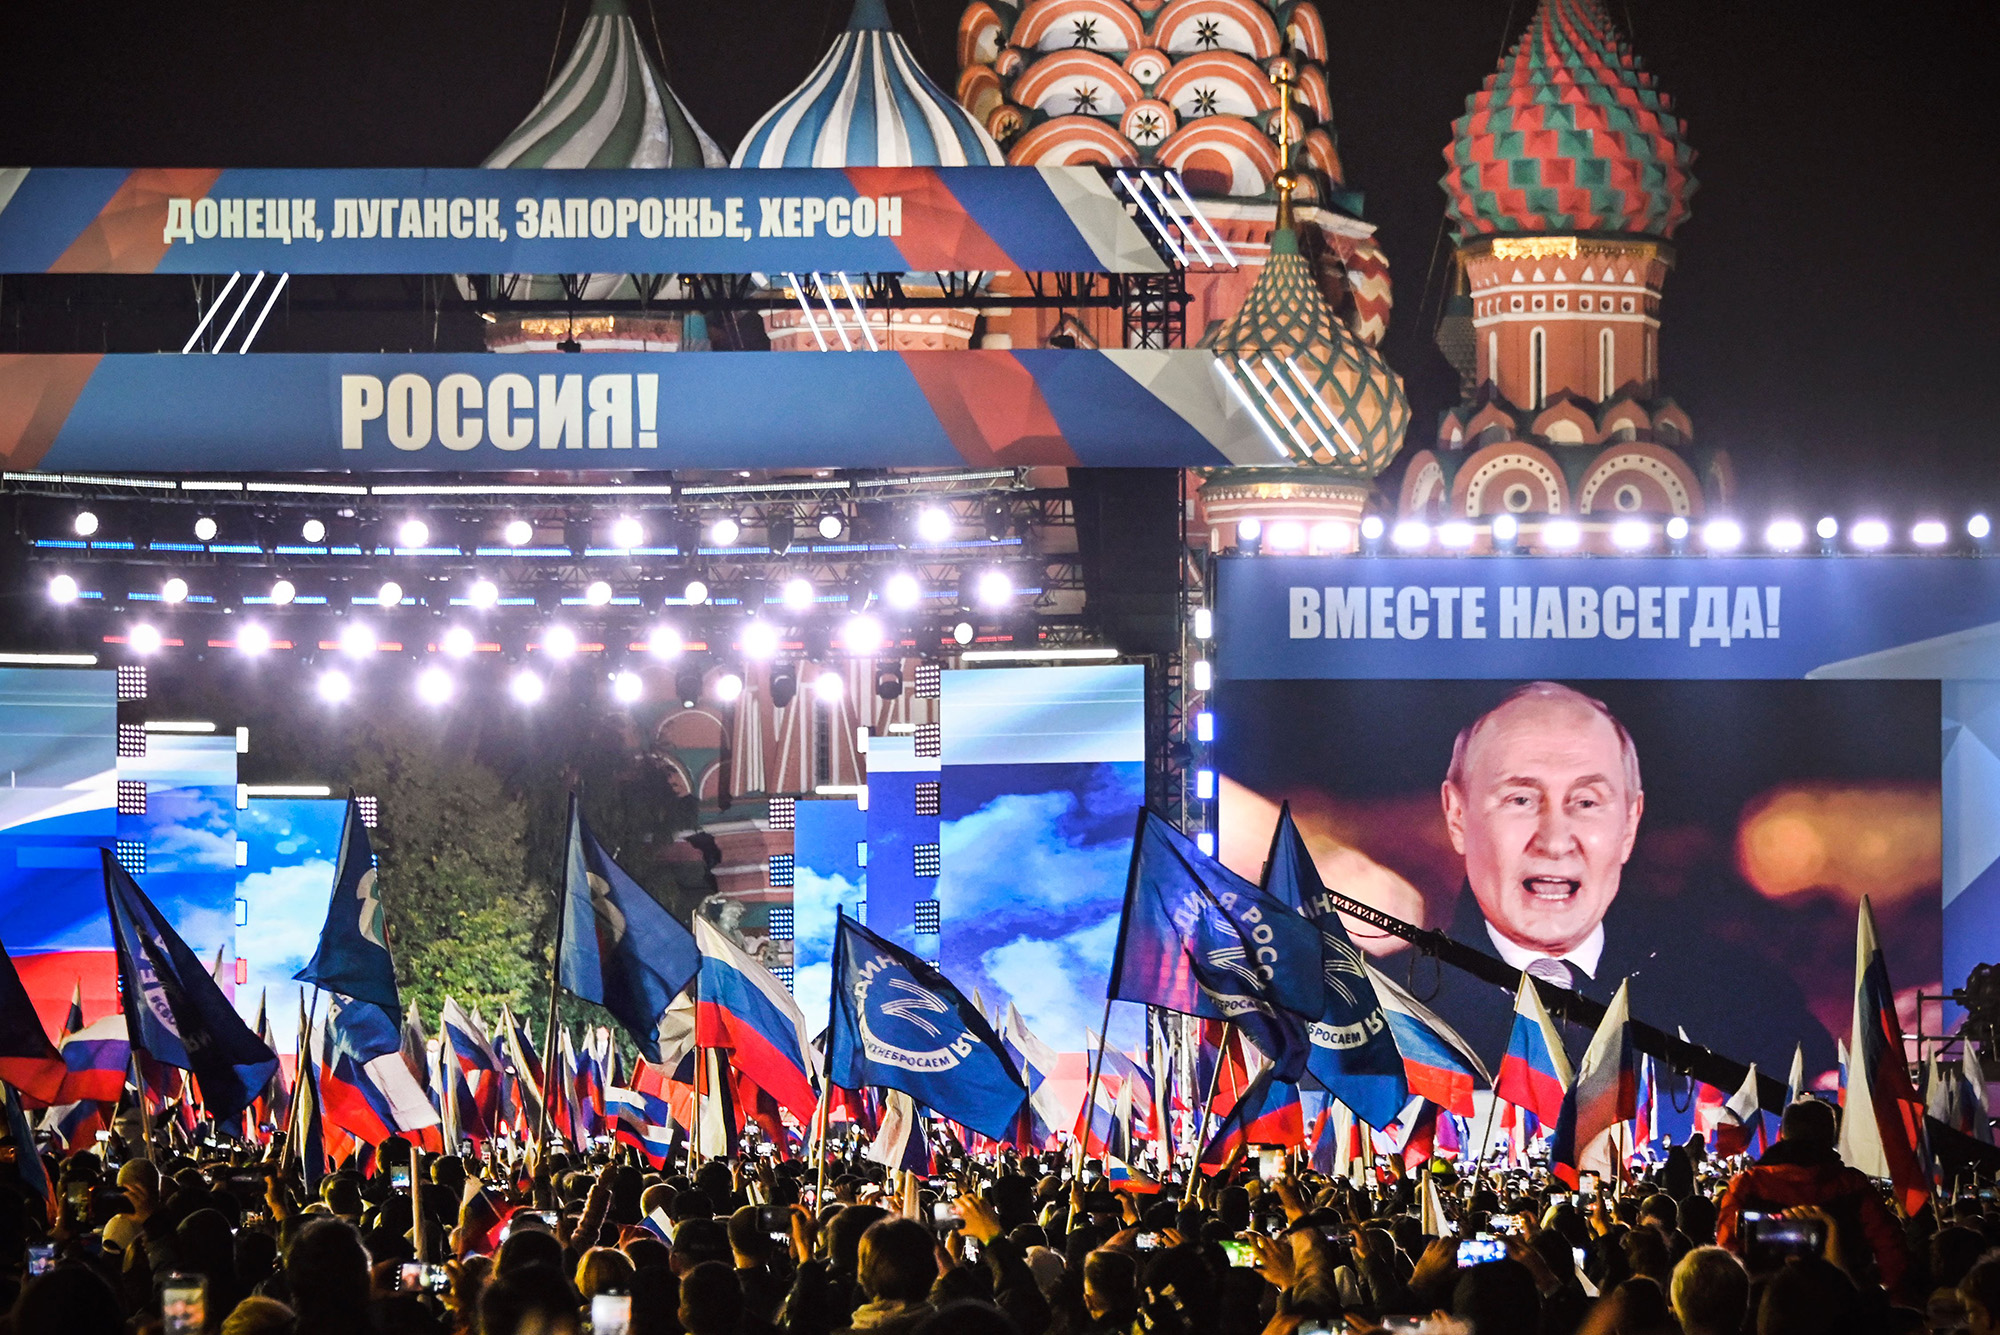 Russian President Vladimir Putin is seen on a screen set at Red Square as he addresses a rally and a concert marking the annexation of four regions of Ukraine - Luhansk, Donetsk, Kherson and Zaporizhzhia - in central Moscow on September 30.